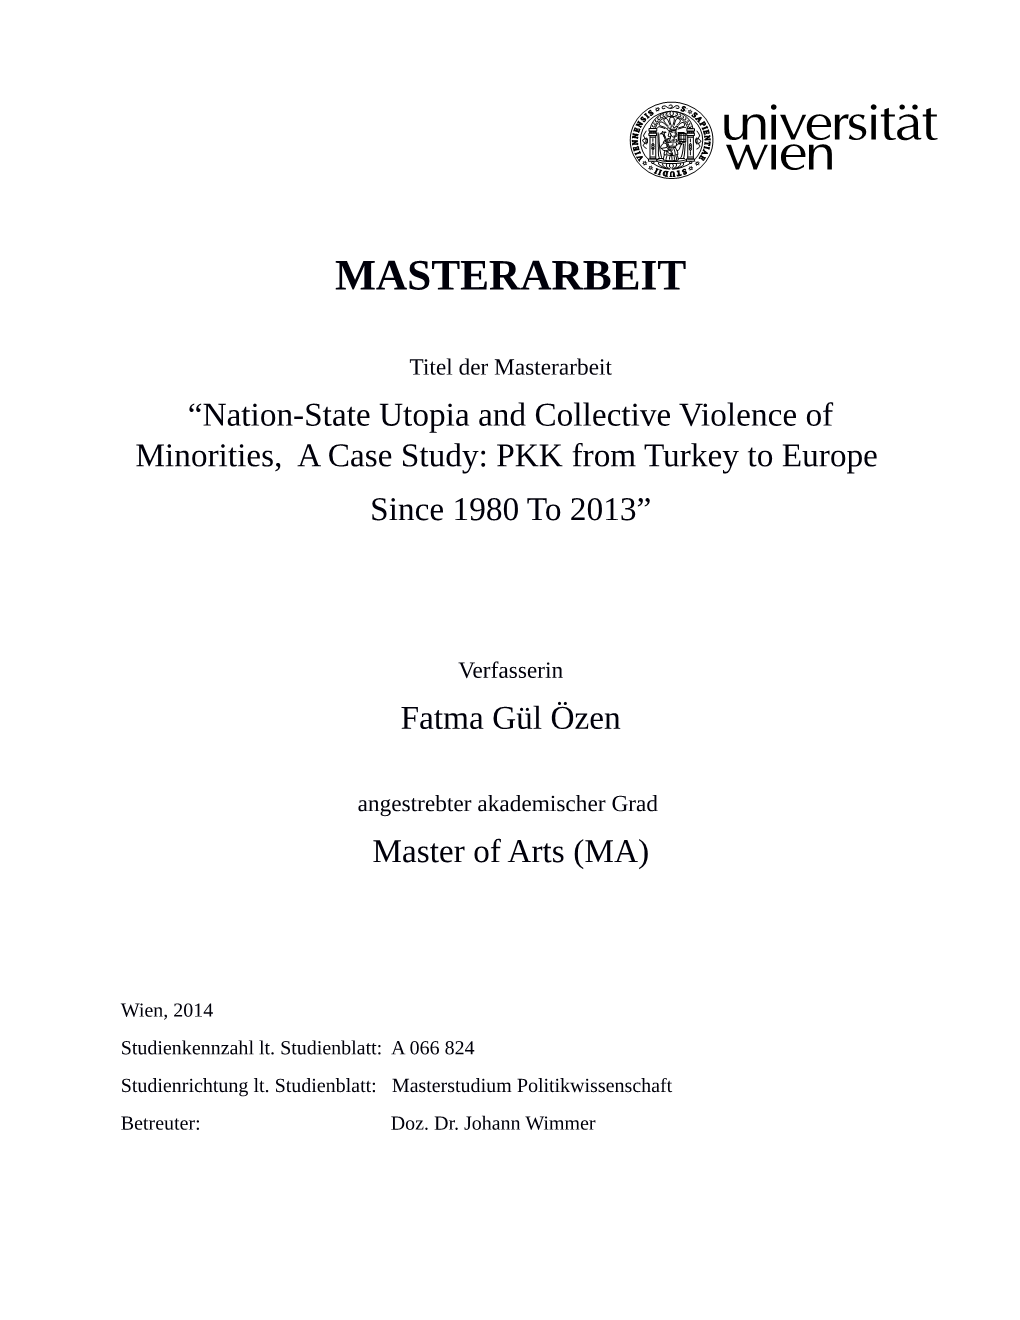 Nation-State Utopia and Collective Violence of Minorities, a Case Study: PKK from Turkey to Europe Since 1980 to 2013”